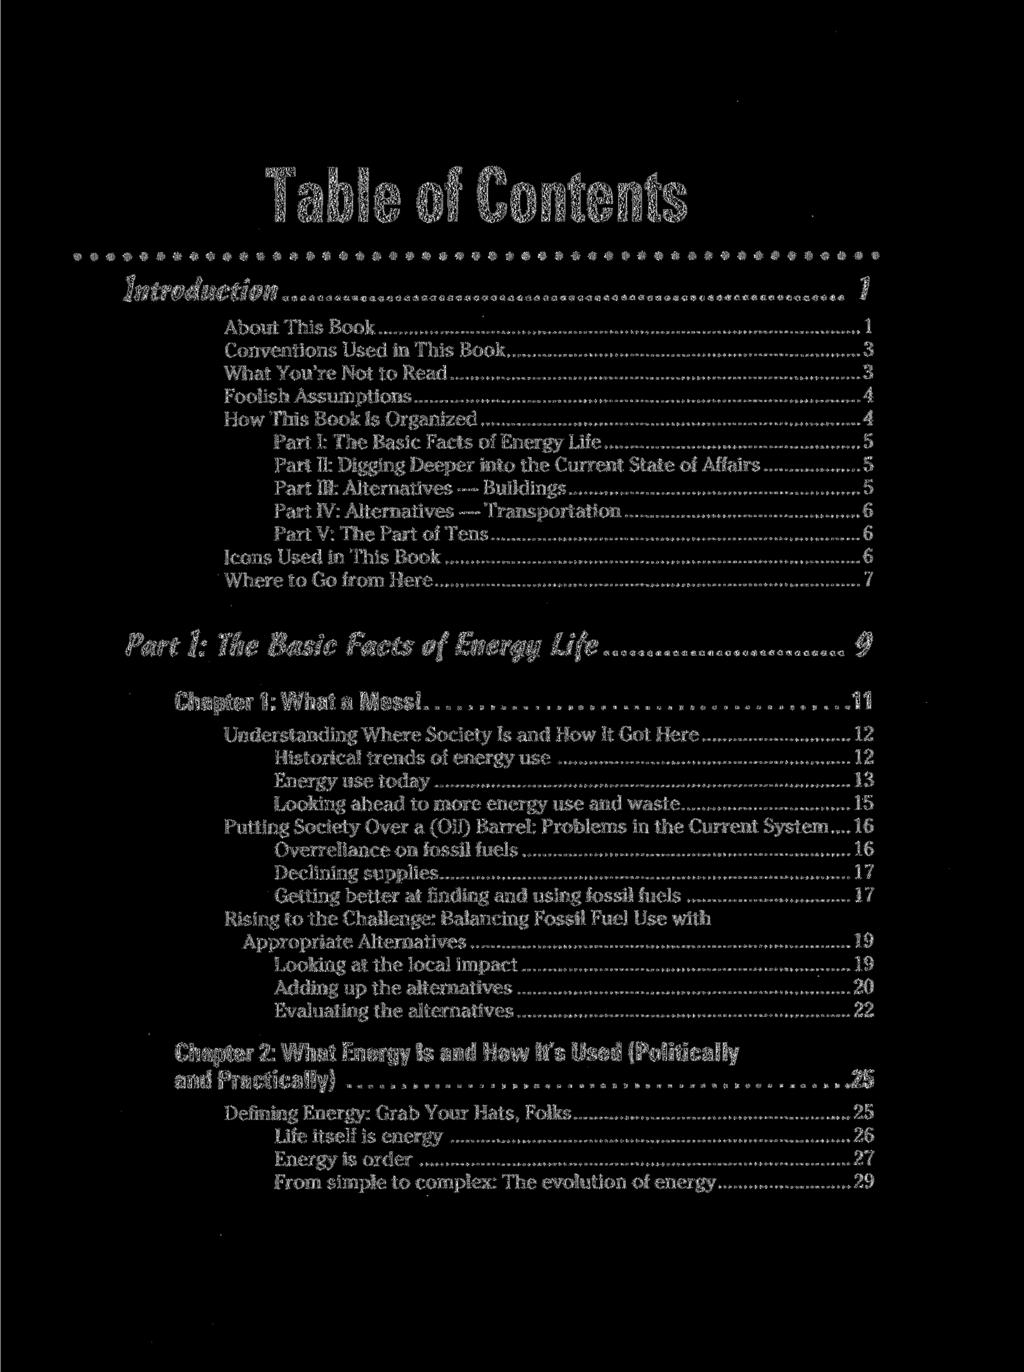 Table of Contents Introduction 7 About This Book 1 Conventions Used in This Book 3 What You're Not to Read 3 Foolish Assumptions 4 How This Book Is Organized 4 Part I: The Basic Facts of Energy Life